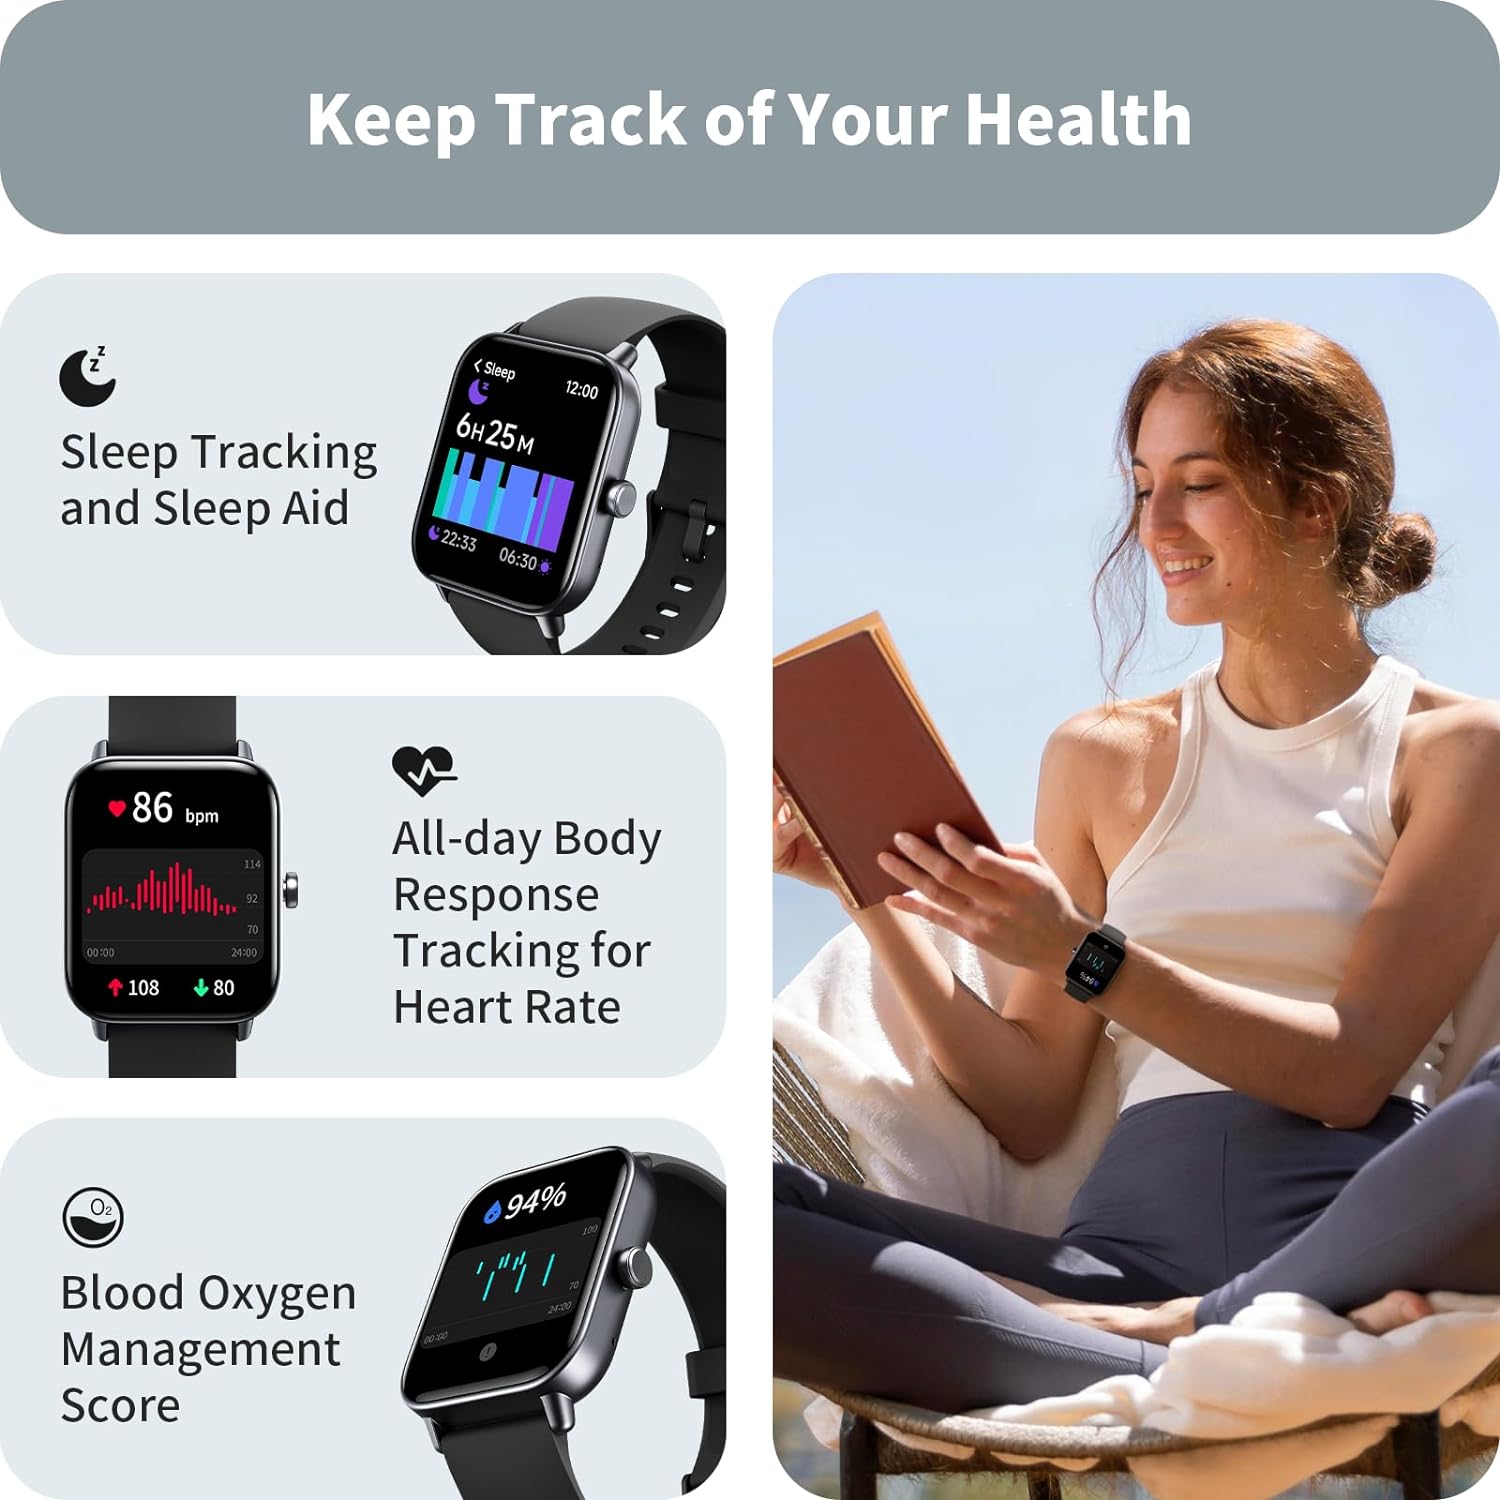 Smart Watch for Women (Alexa Built-in & Bluetooth Call), 1.8" Smartwatch with SpO2/Heart Rate/Sleep/Stress Monitor, Calorie/Step/Distance Counter, 100+ Sport Modes, IP68 Fitness Watch for Android iOS